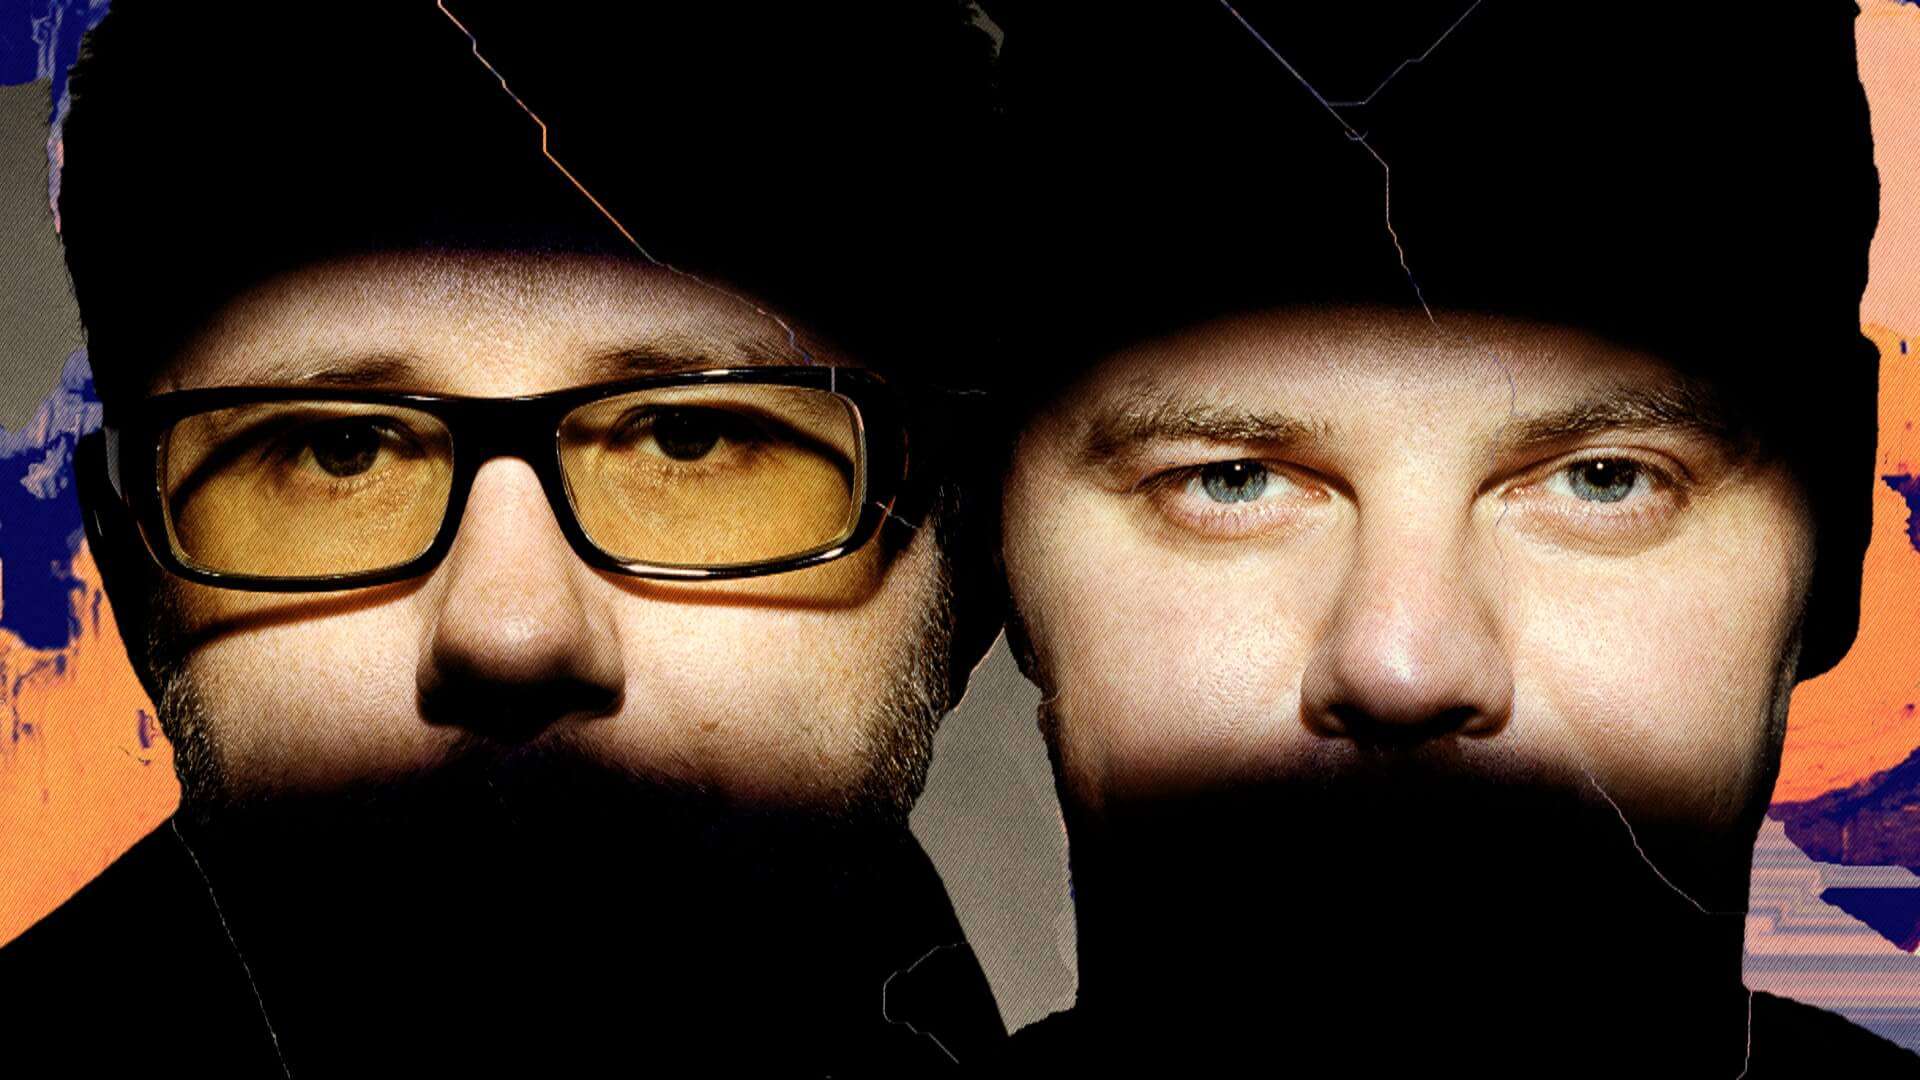 The Chemical Brothers share video for new single, ‘No Reason’: Listen